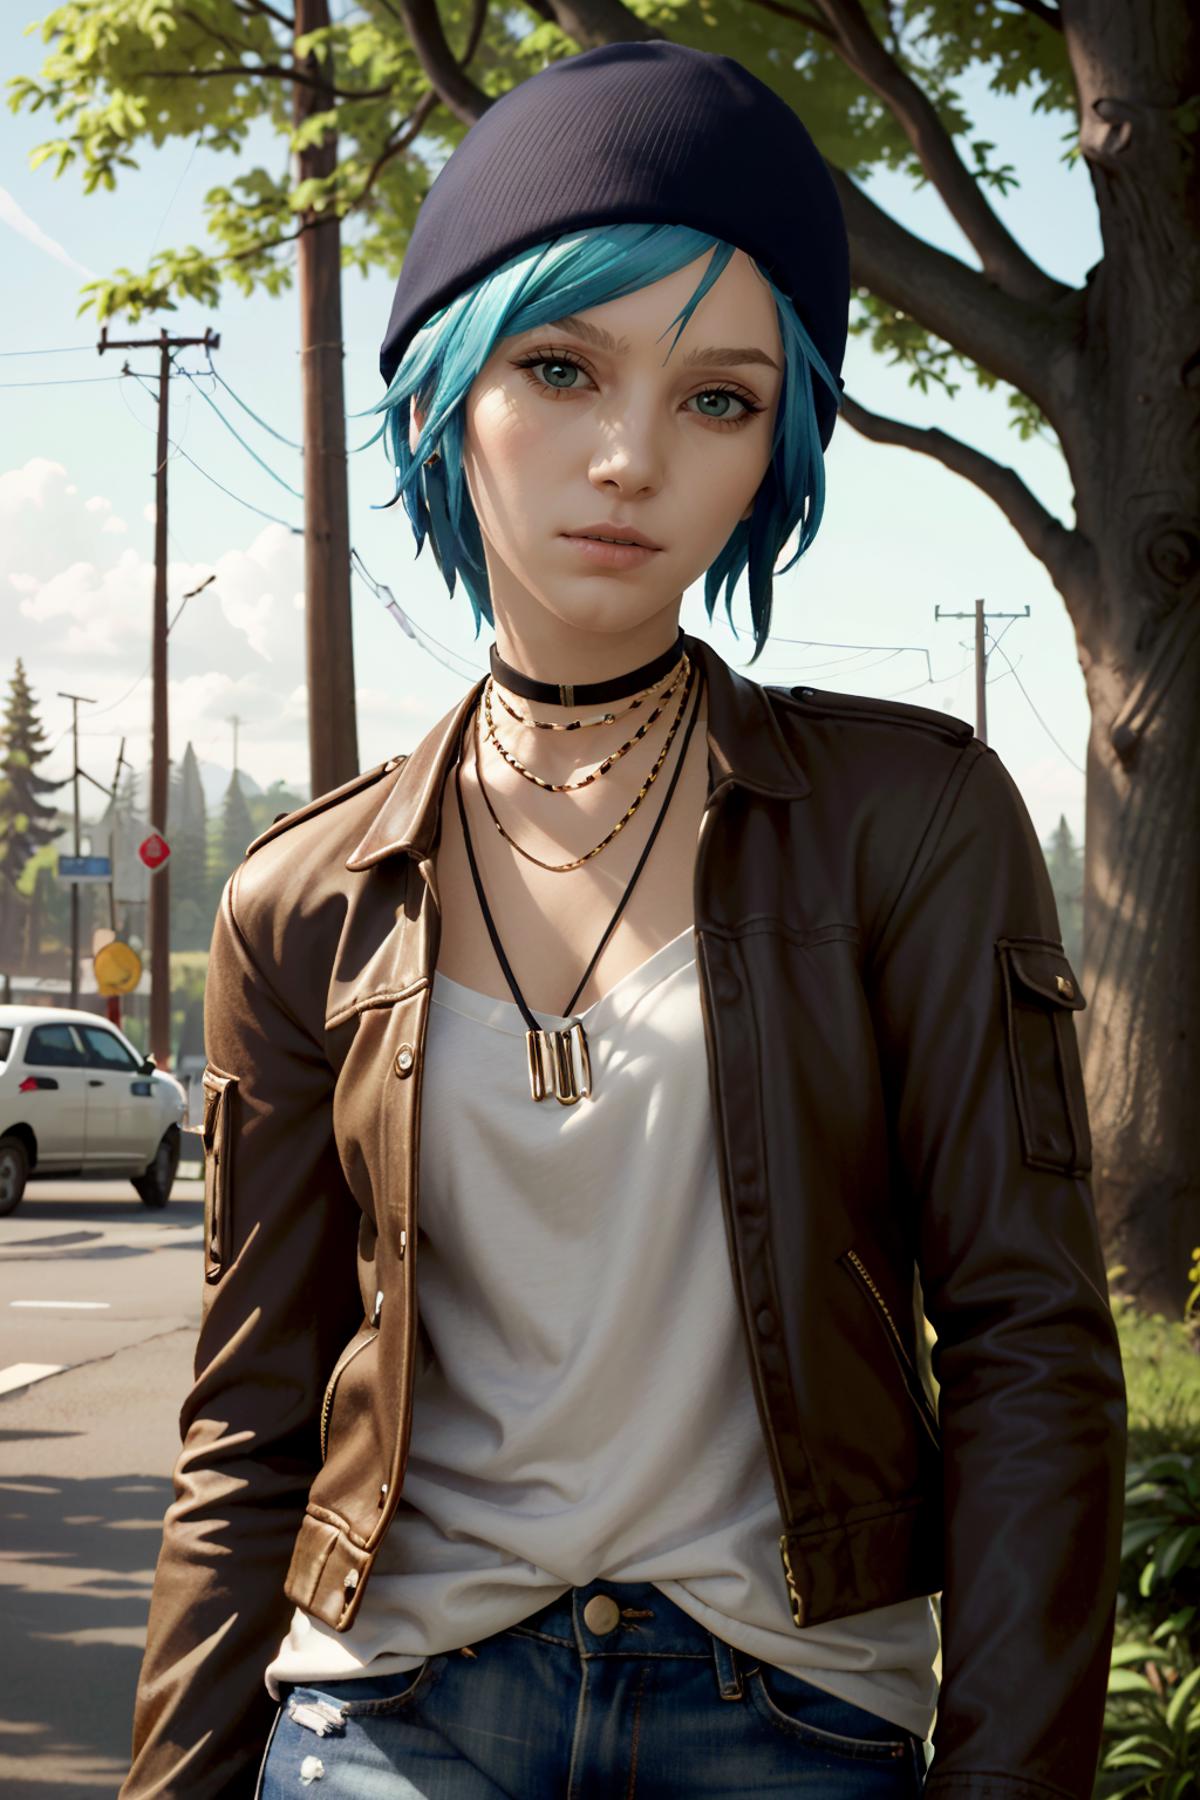 Chloe Price from Life is Strange image by BloodRedKittie